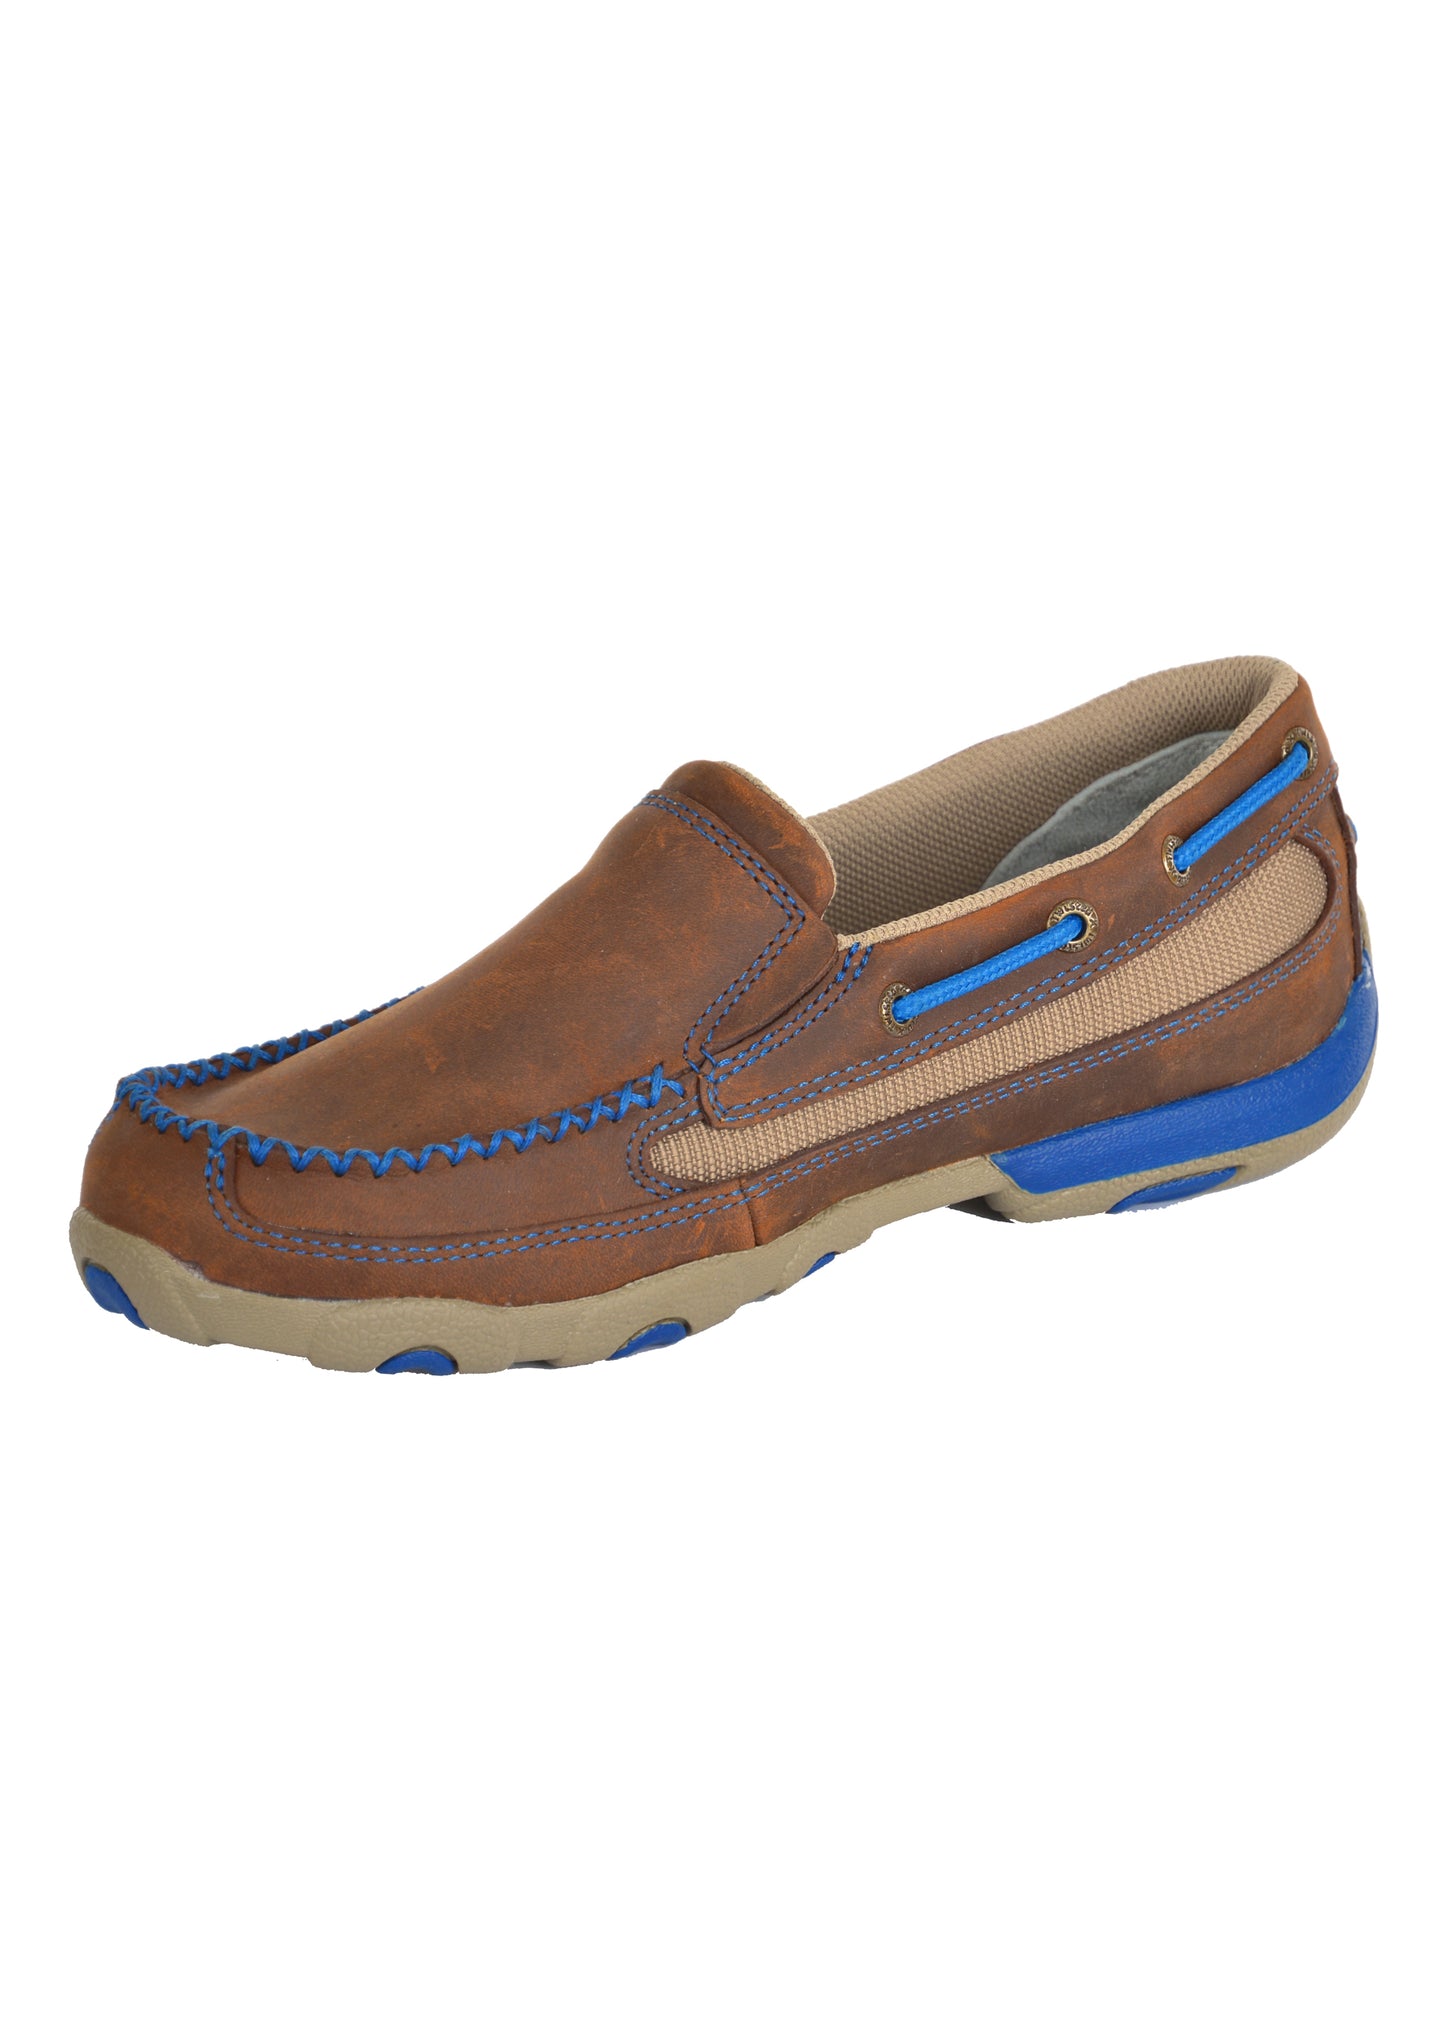 Twisted X Ladies Classic Royal Cross Stitch Slip On Mocs - Oiled Saddle/Blue - TCWCMS014- ON SALE